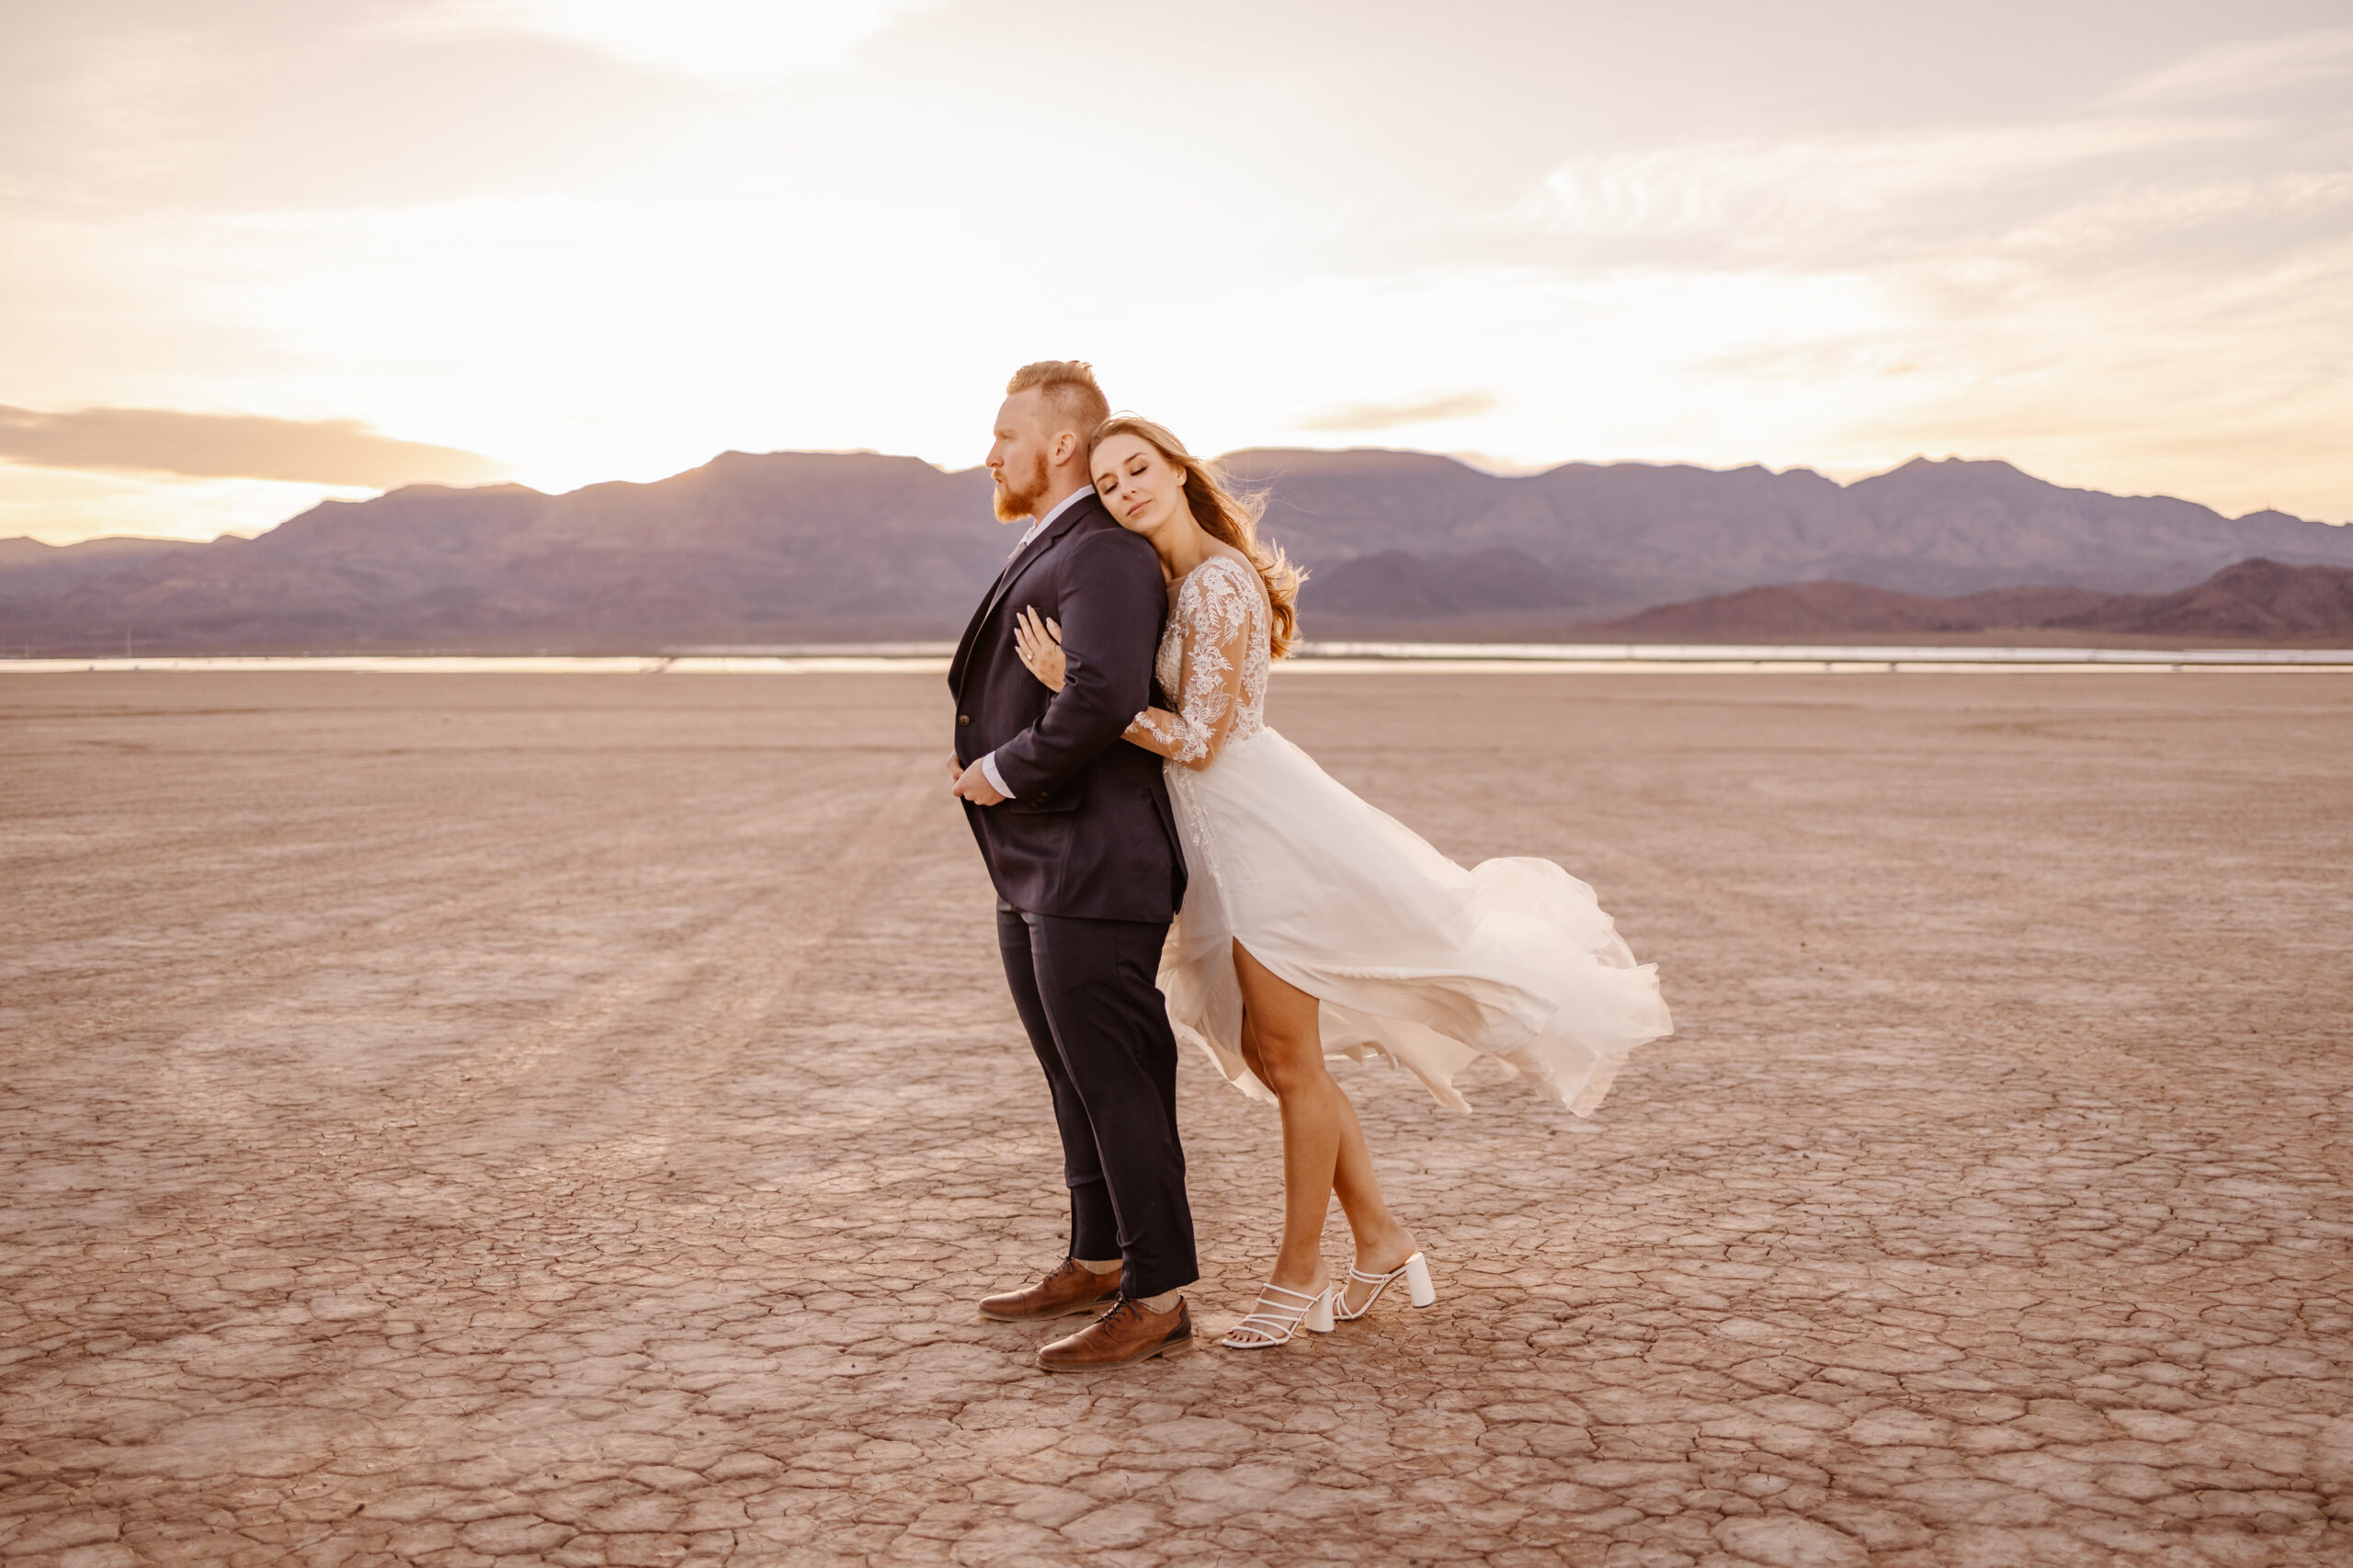 Bride hugs groom from behind at sunset during their elopement at a dry lake bed in Las Vegas